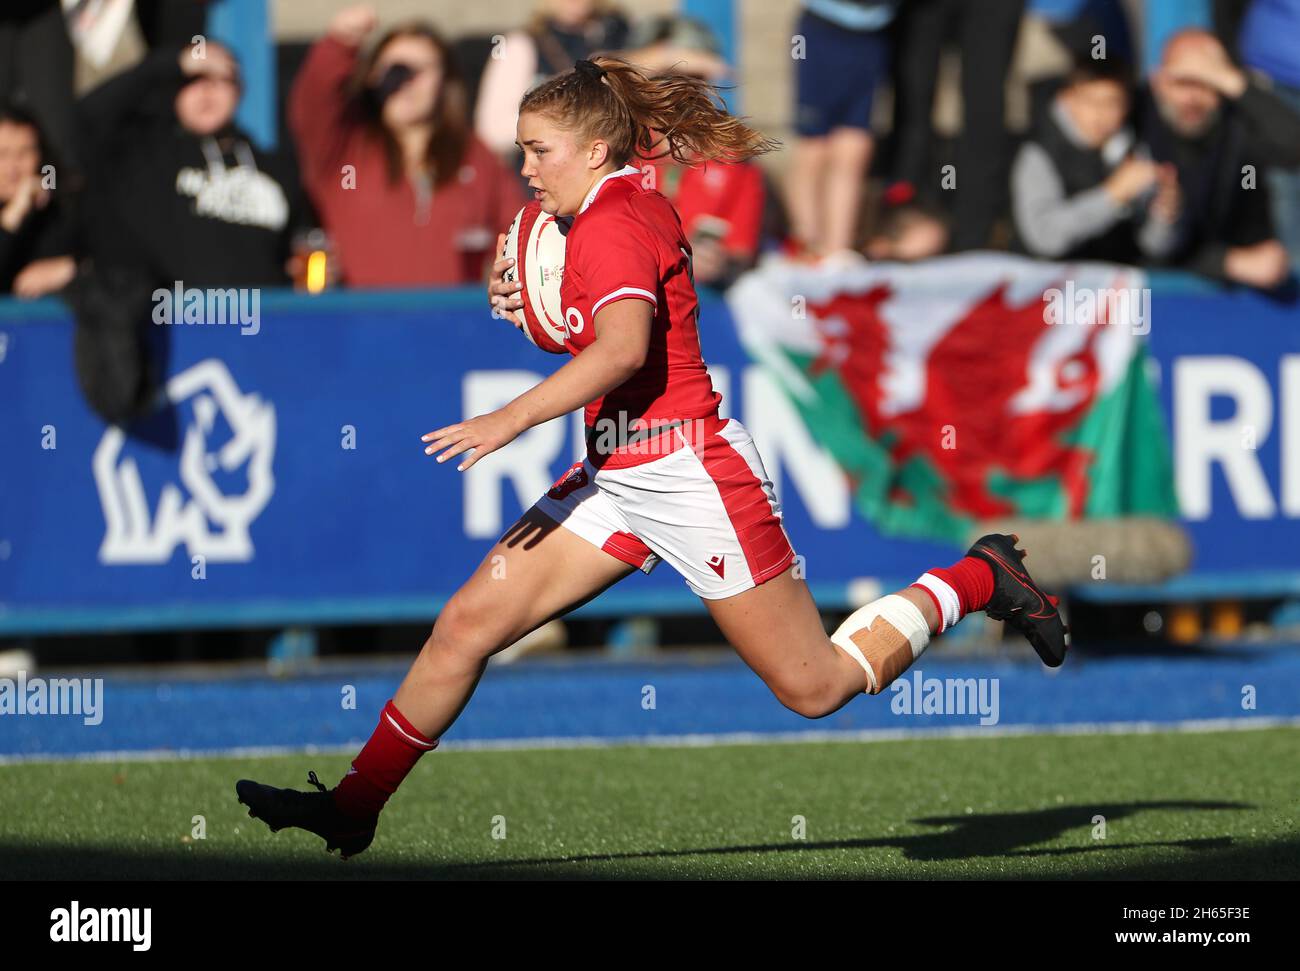 Wales' Niamh Terry during the Autumn International match at Cardiff Arms park, Cardiff. Picture date: Saturday November 13, 2021. See PA story RUGBYU Wales Women. Photo credit should read: Bradley Collyer/PA Wire. RESTRICTIONS: Use subject to restrictions. Editorial use only, no commercial use without prior consent from rights holder. Stock Photo